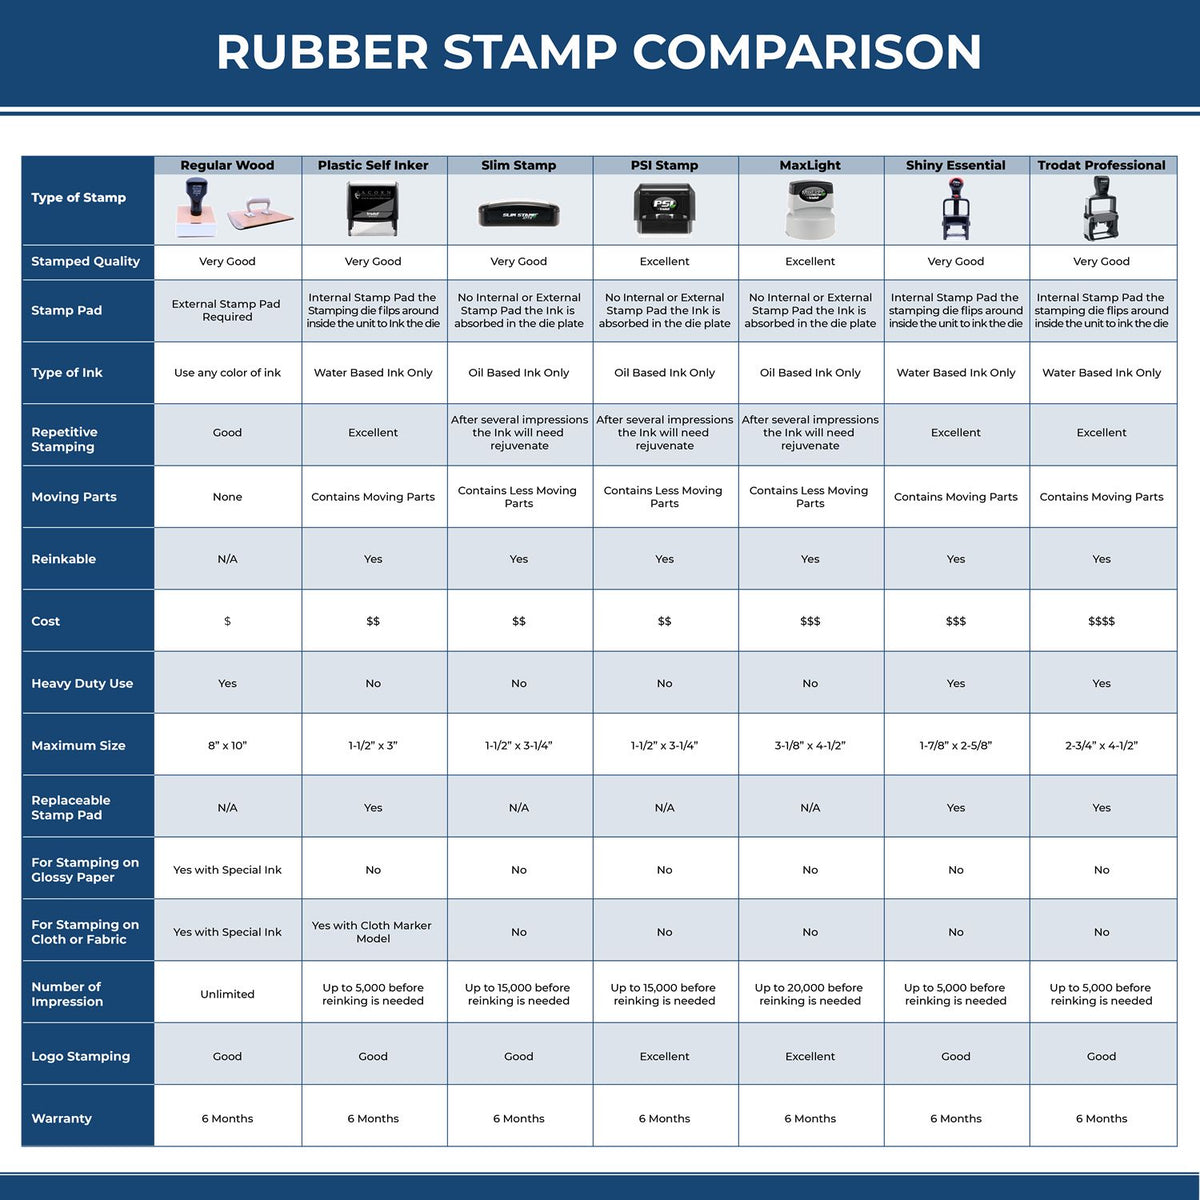 Self-Inking Bold Font File Stamp 4175S Rubber Stamp Comparison